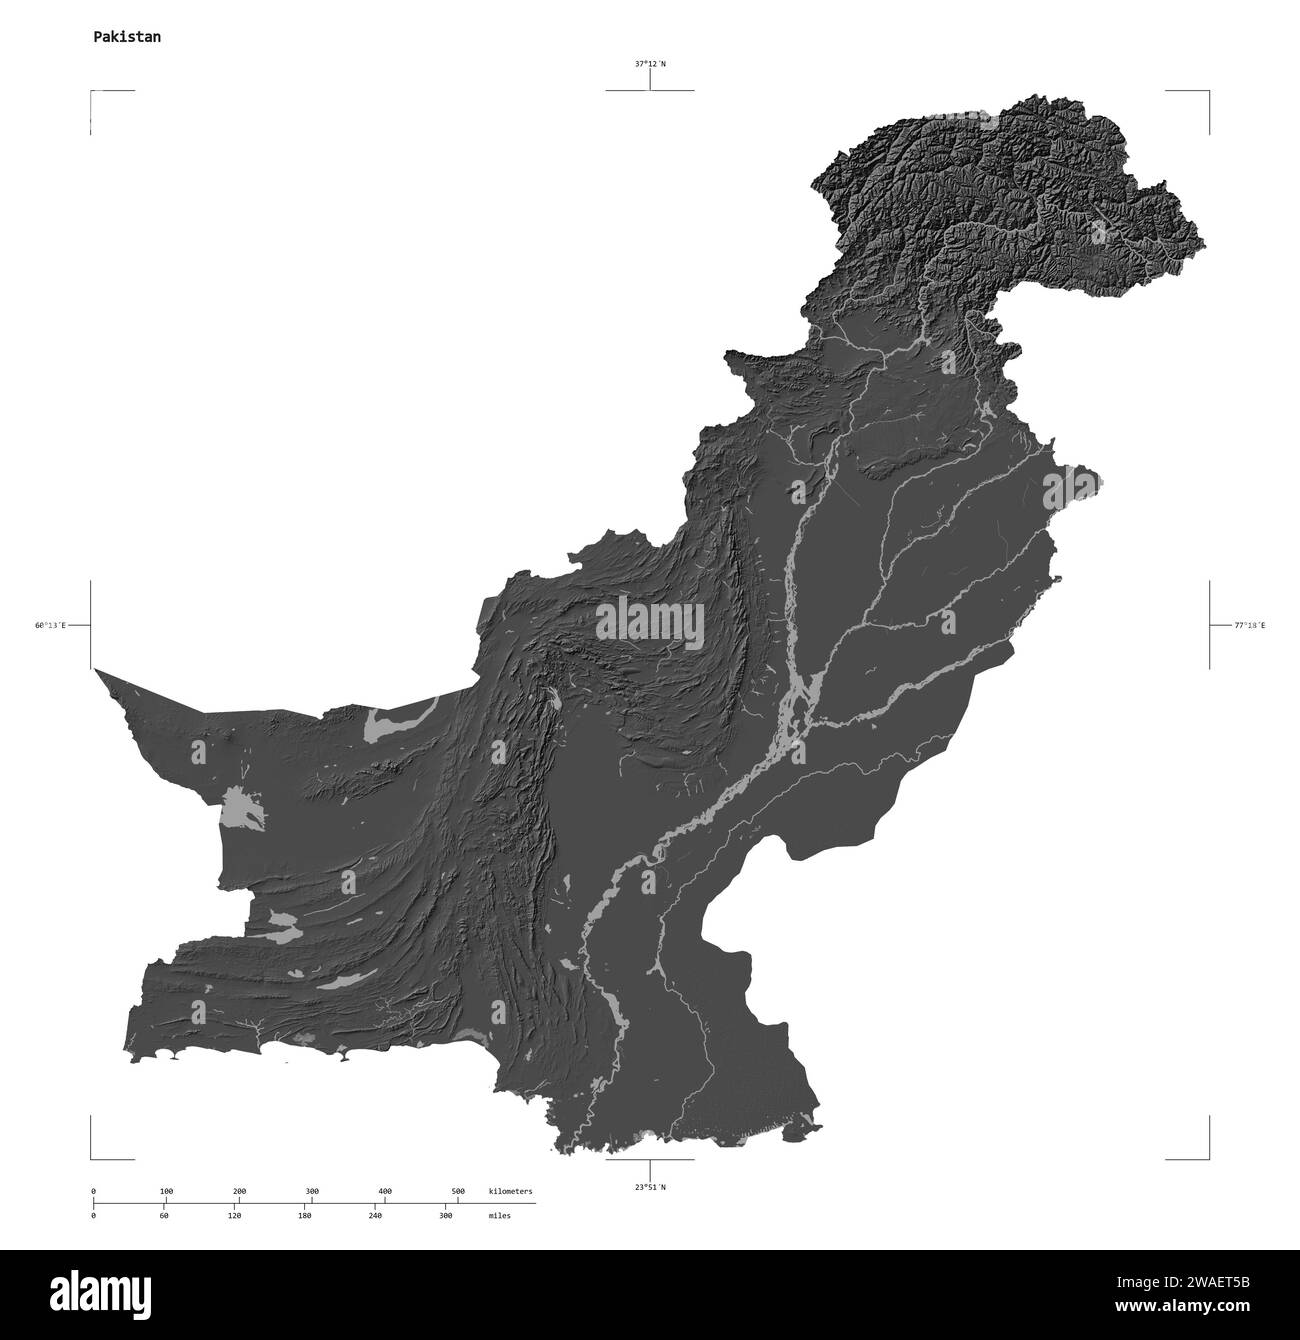 Shape of a Bilevel elevation map with lakes and rivers of the Pakistan, with distance scale and map border coordinates, isolated on white Stock Photo